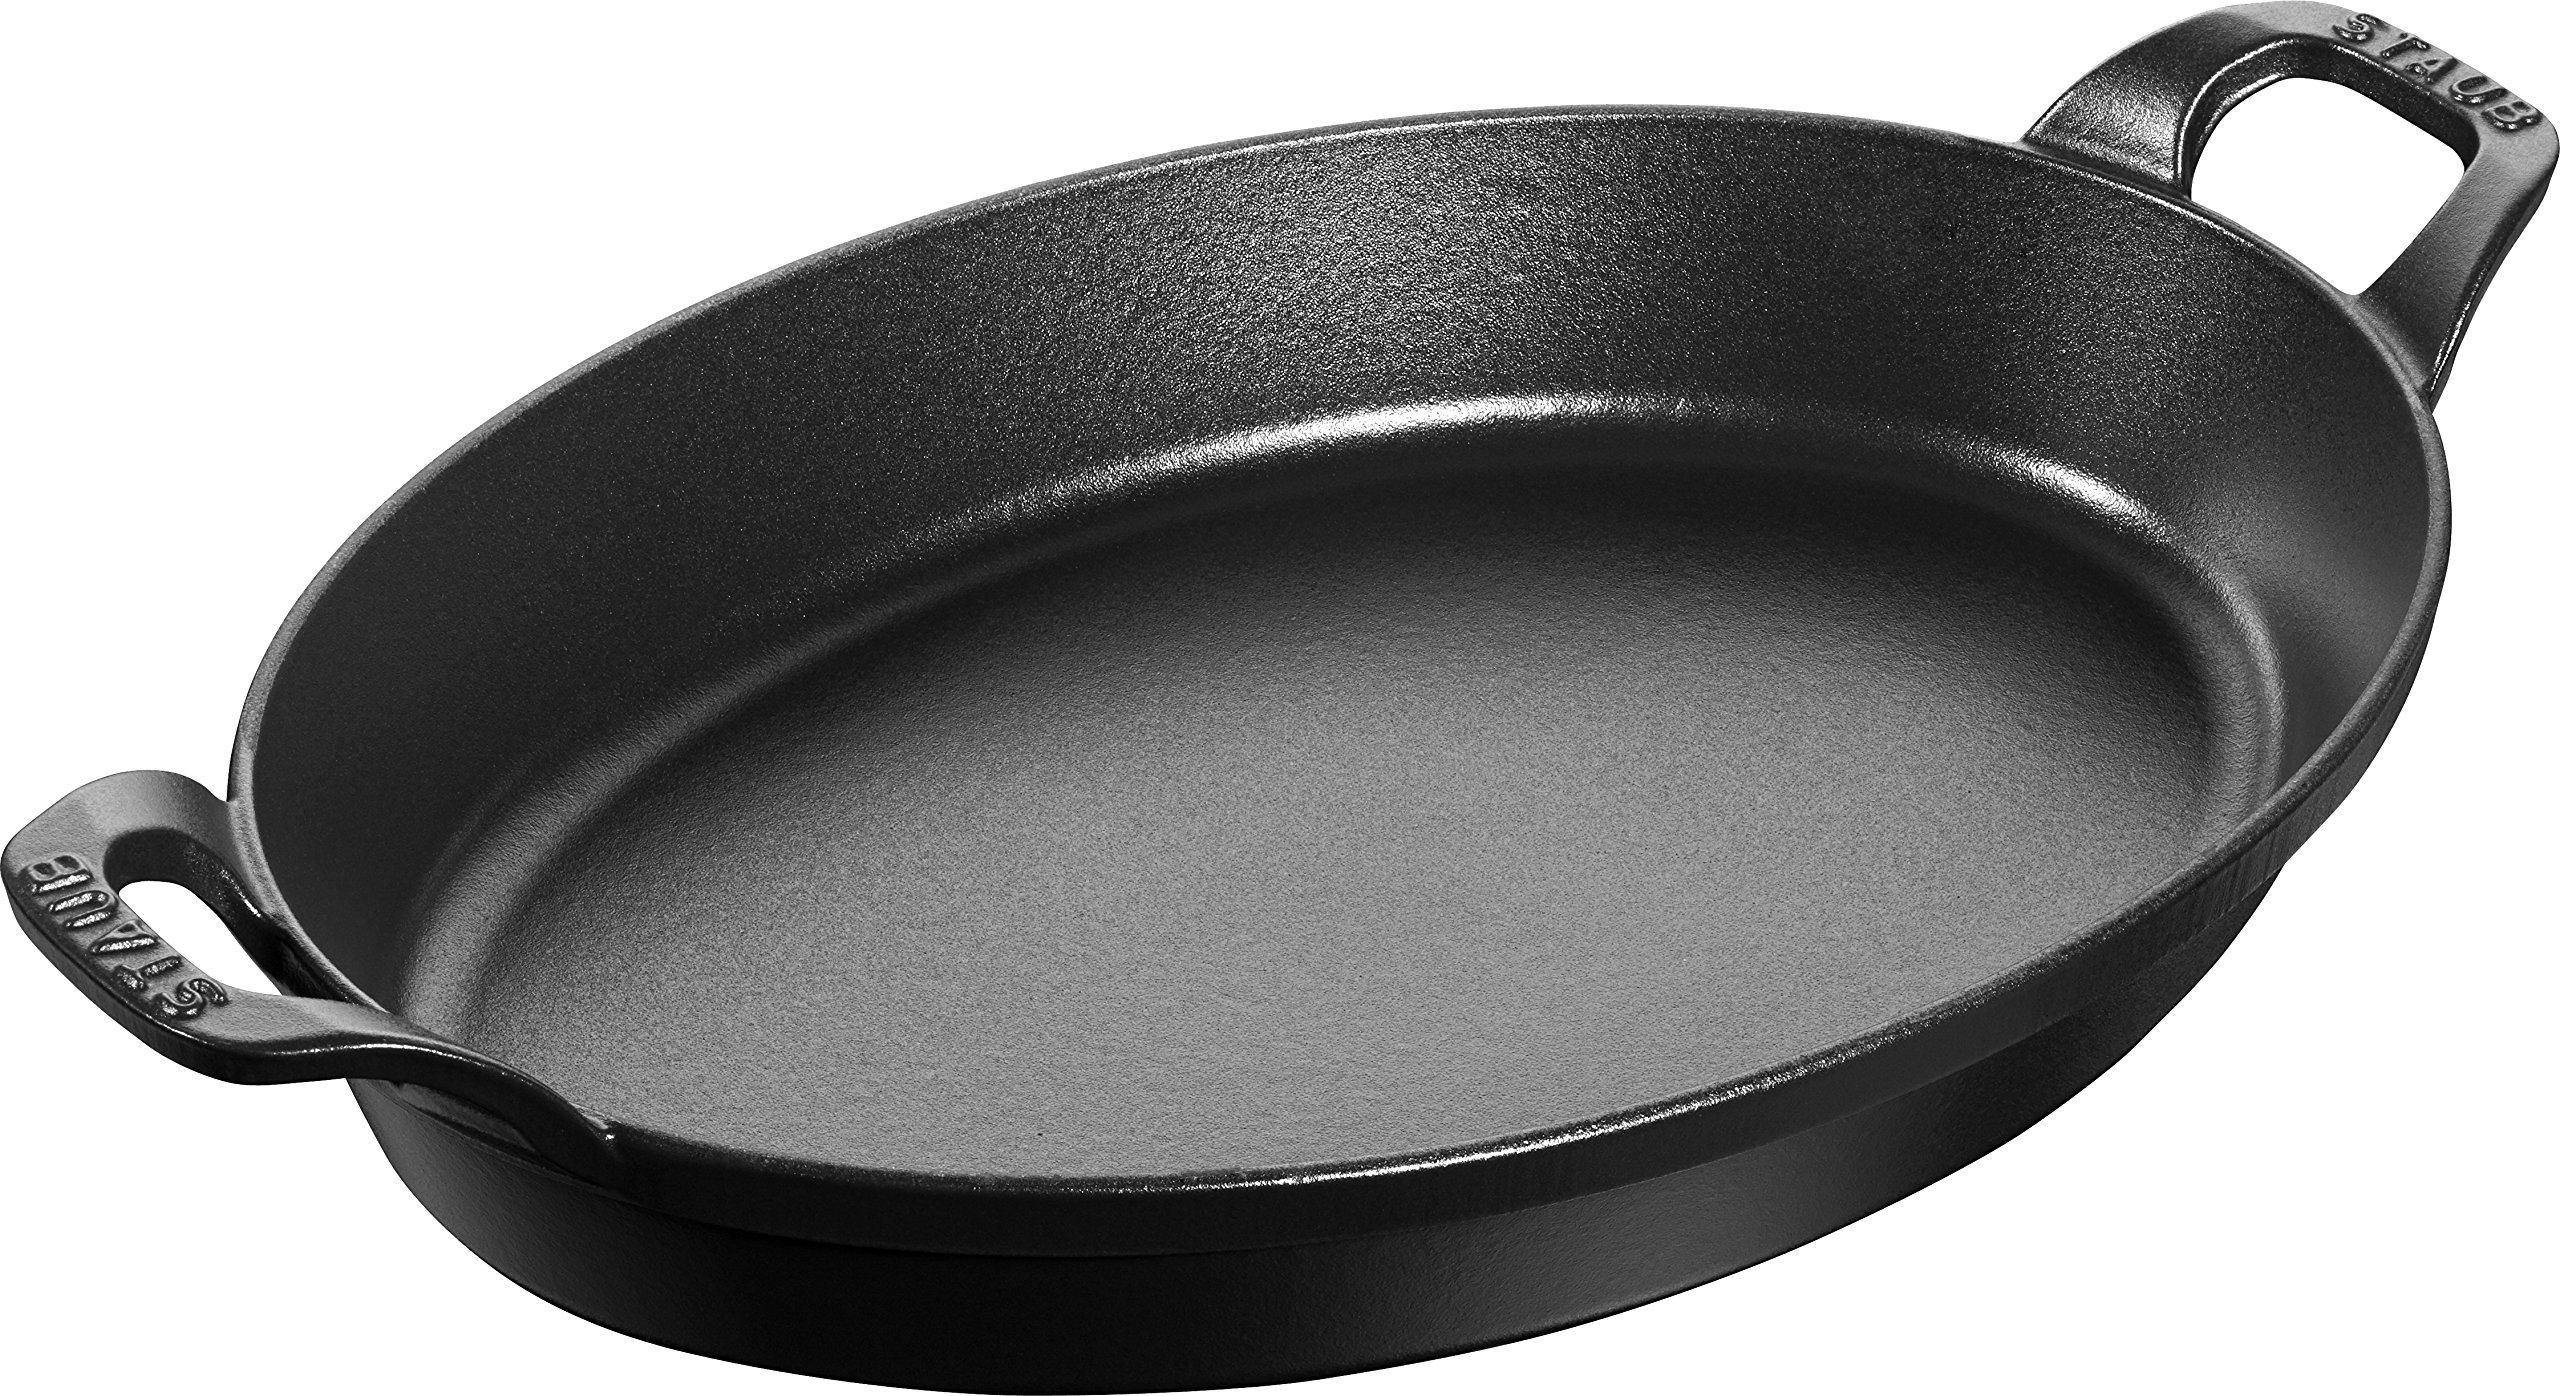 Staub 40508-283 Oval Stackable Dish, Black, 14.6 inches (37 cm), Cast Enamel, Iron